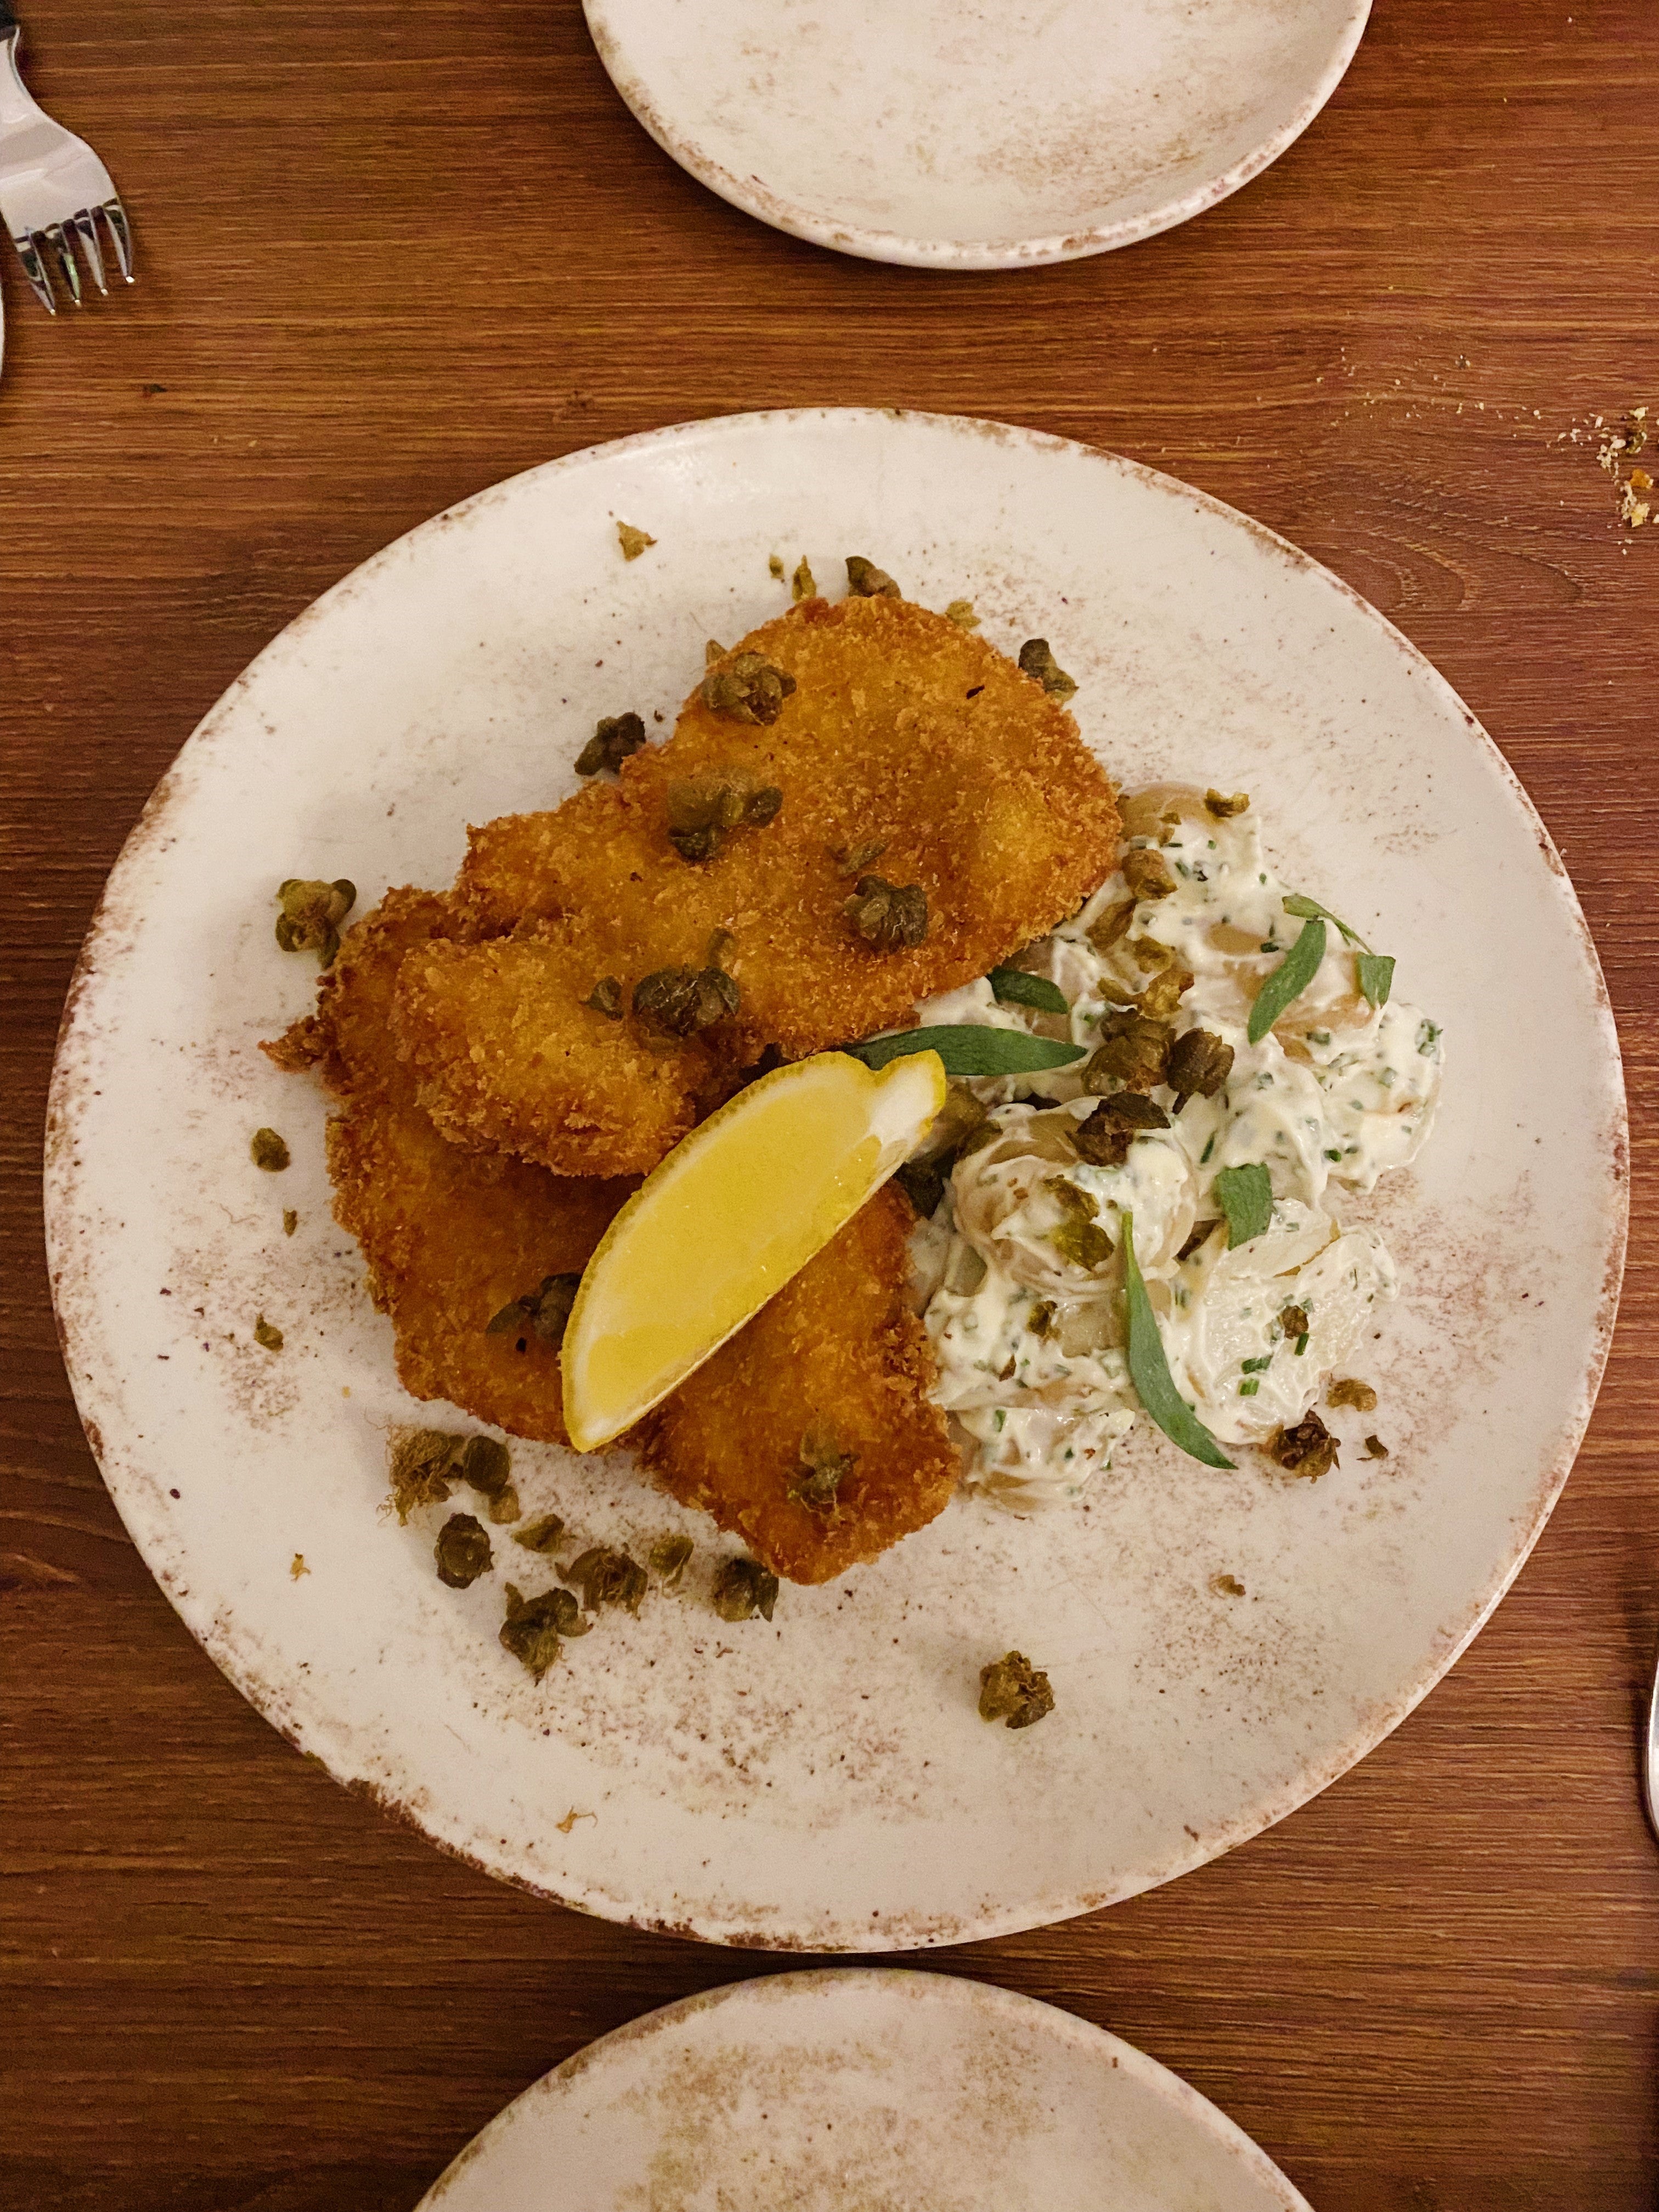 The monkfish schnitzel pays homage to the German-influenced boozer that once occupied the space